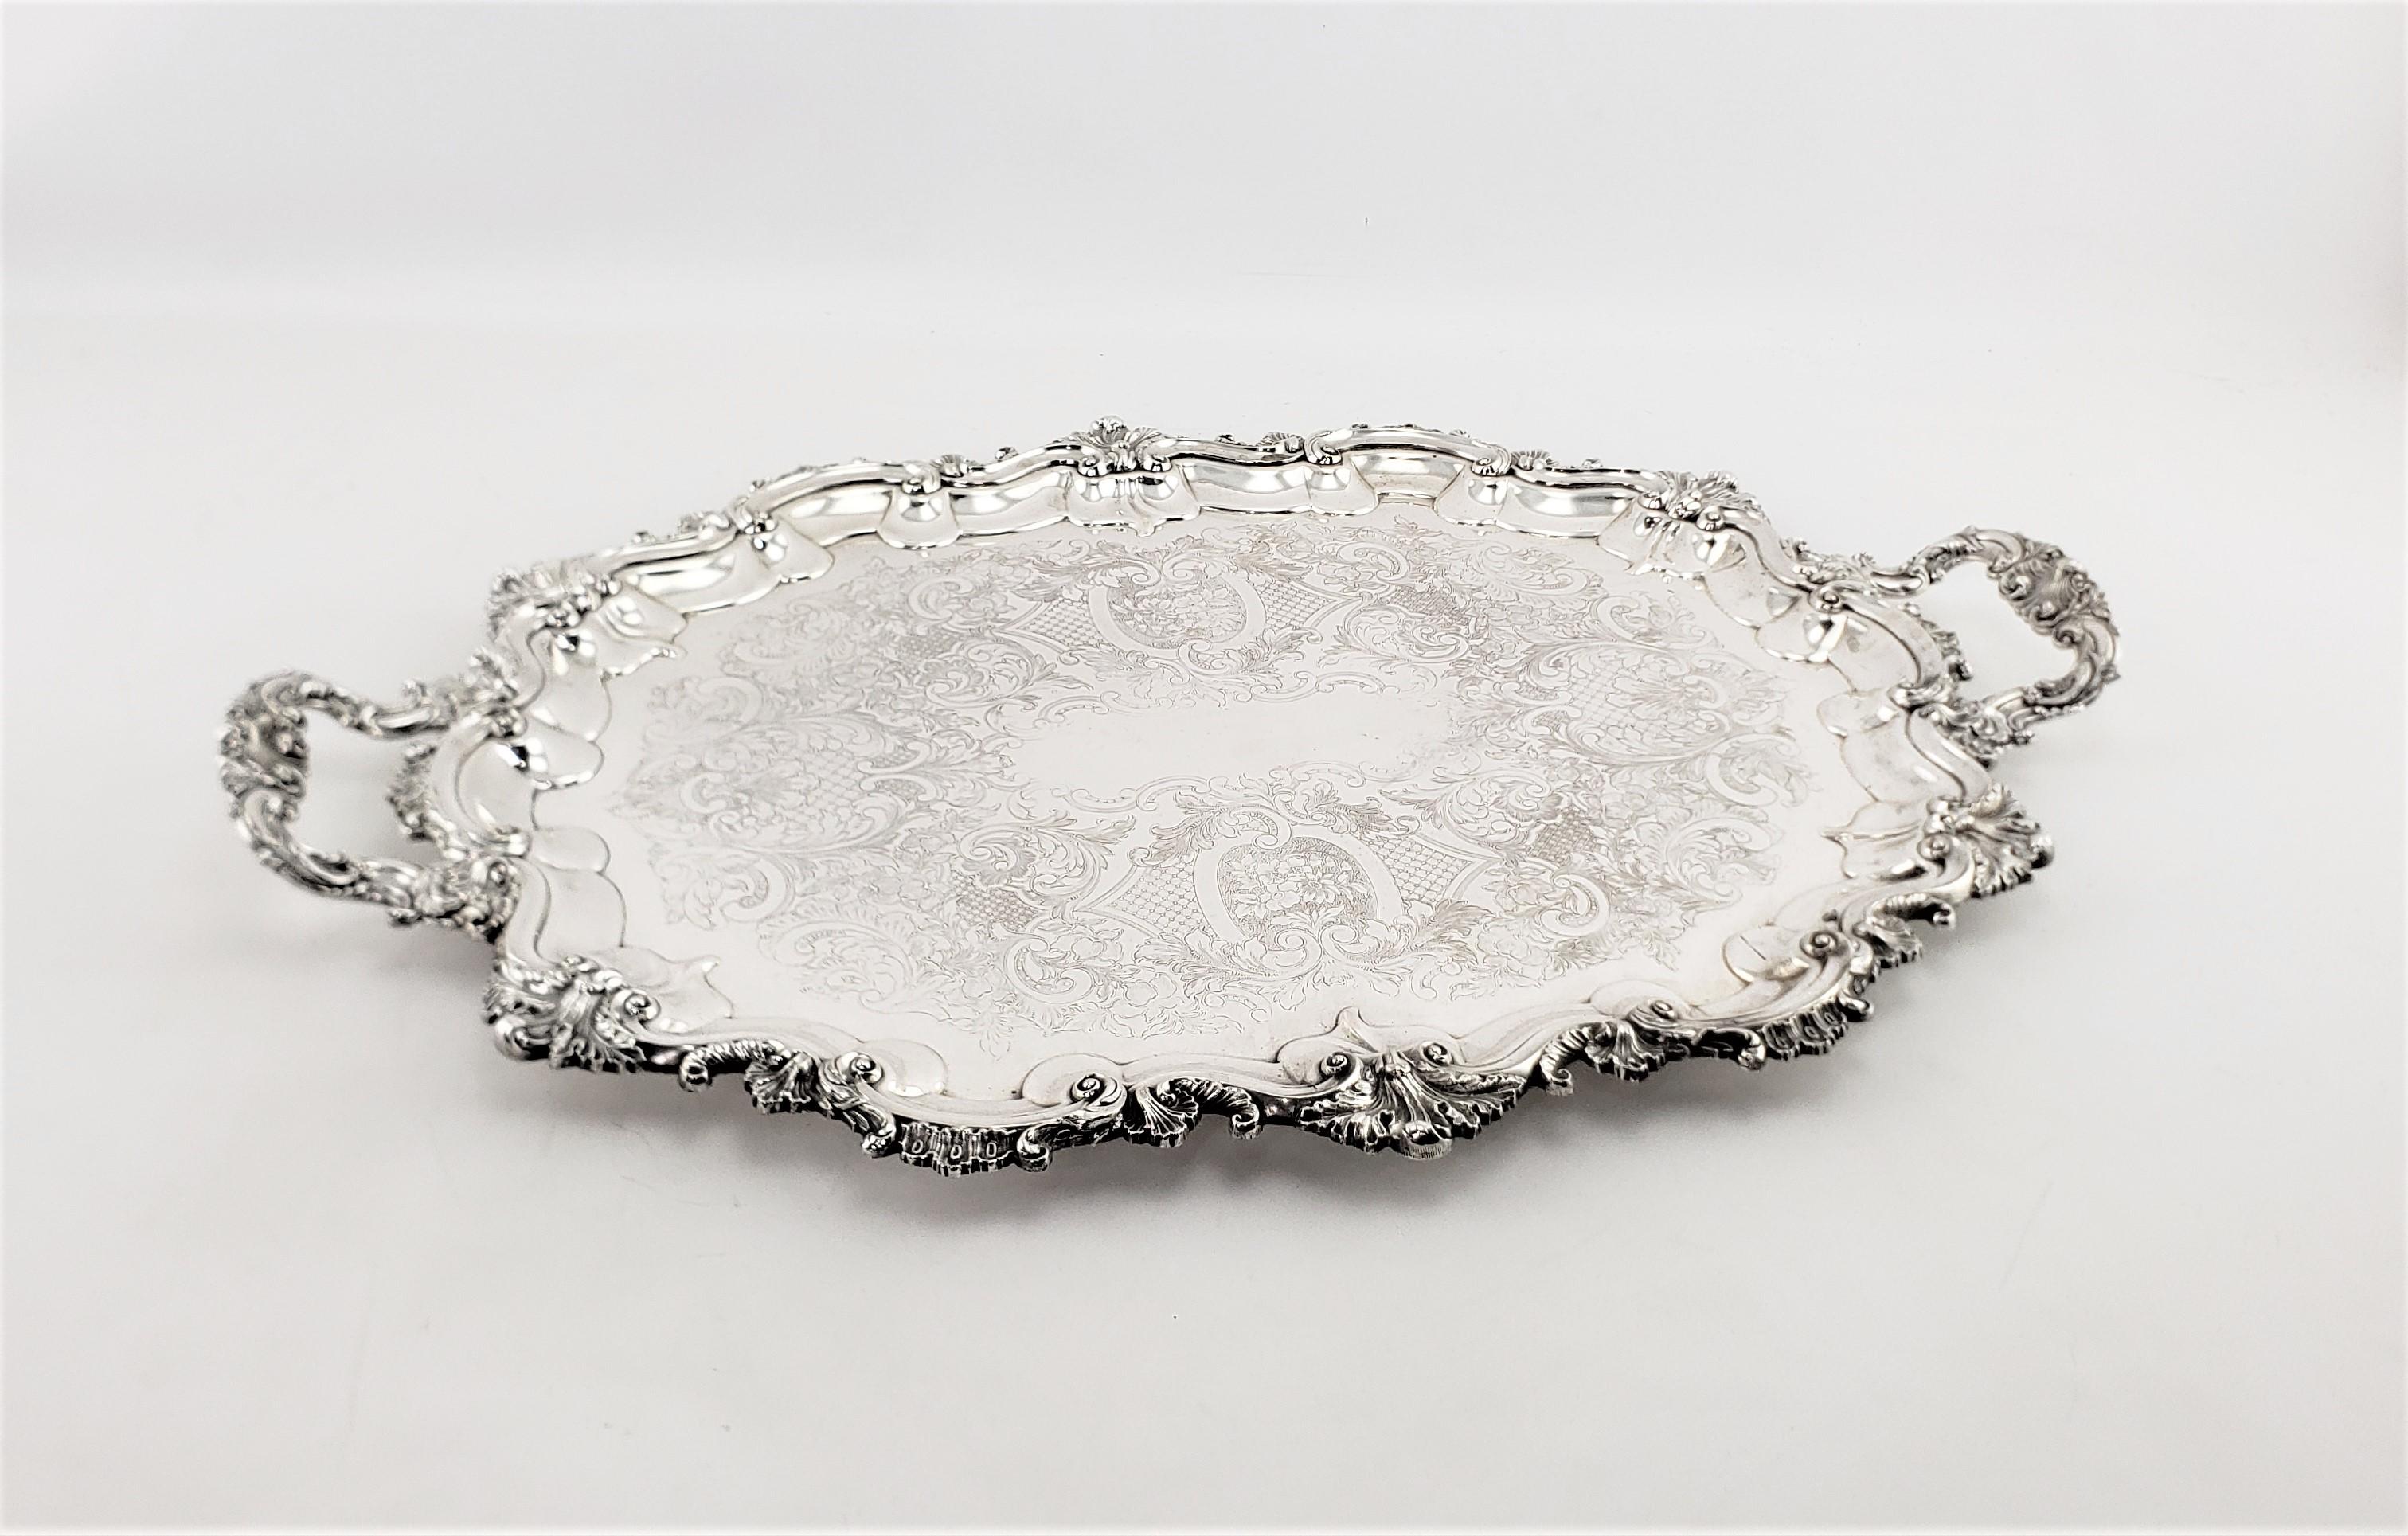 This large antique silver plated oval serving tray originates from England and made in approximately 1920 in a Victorian style. The tray has very ornate stylized floral decoration on the entire surround which is accented on the handles. The surface